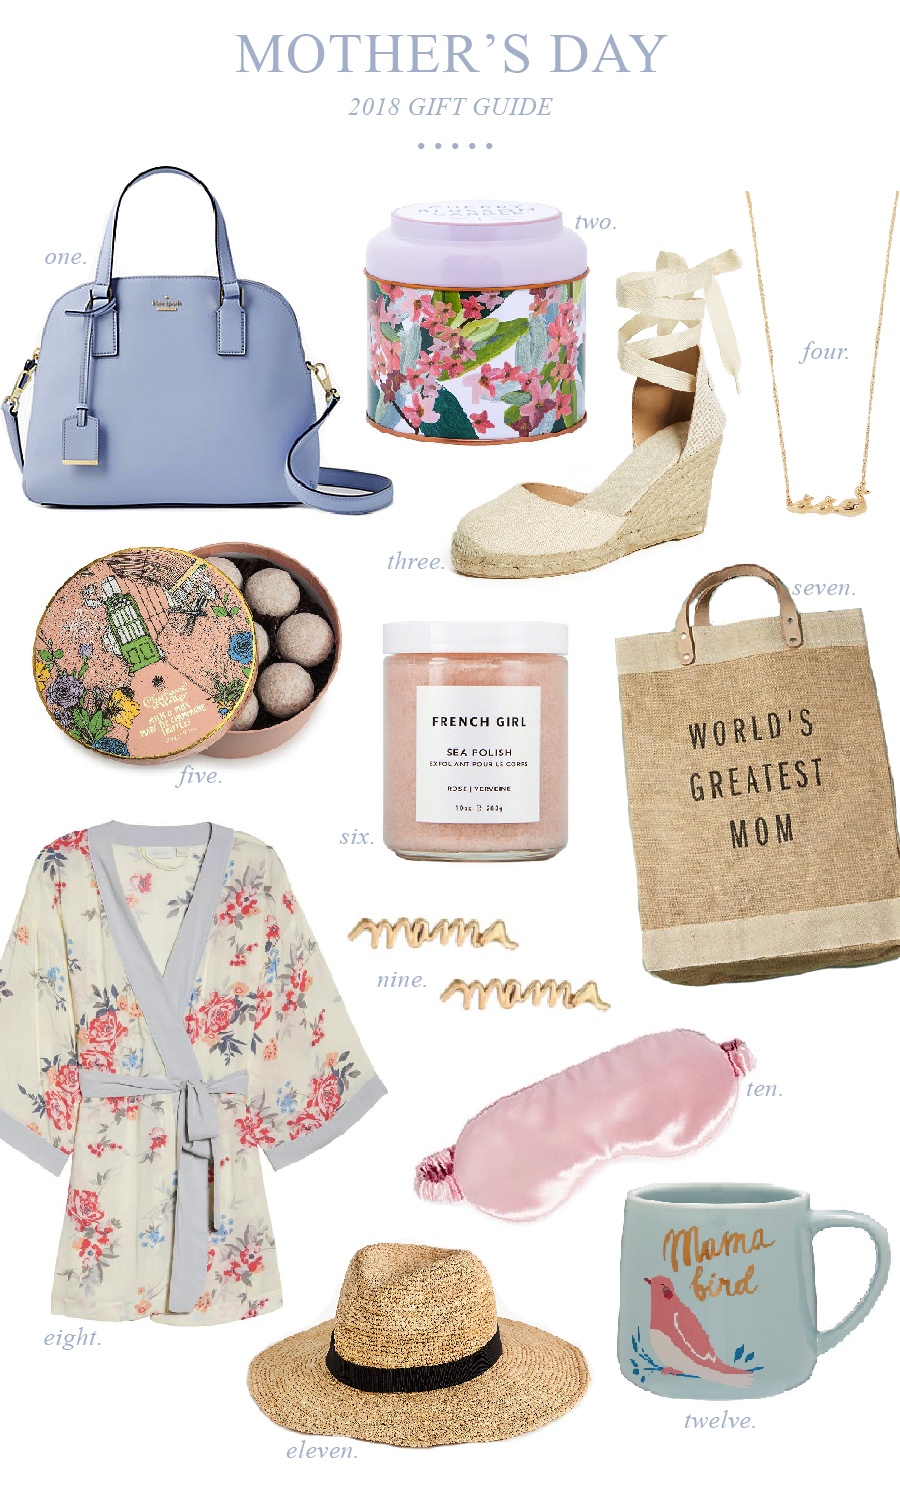 Mother's Day 2018 Gift Guide | The 